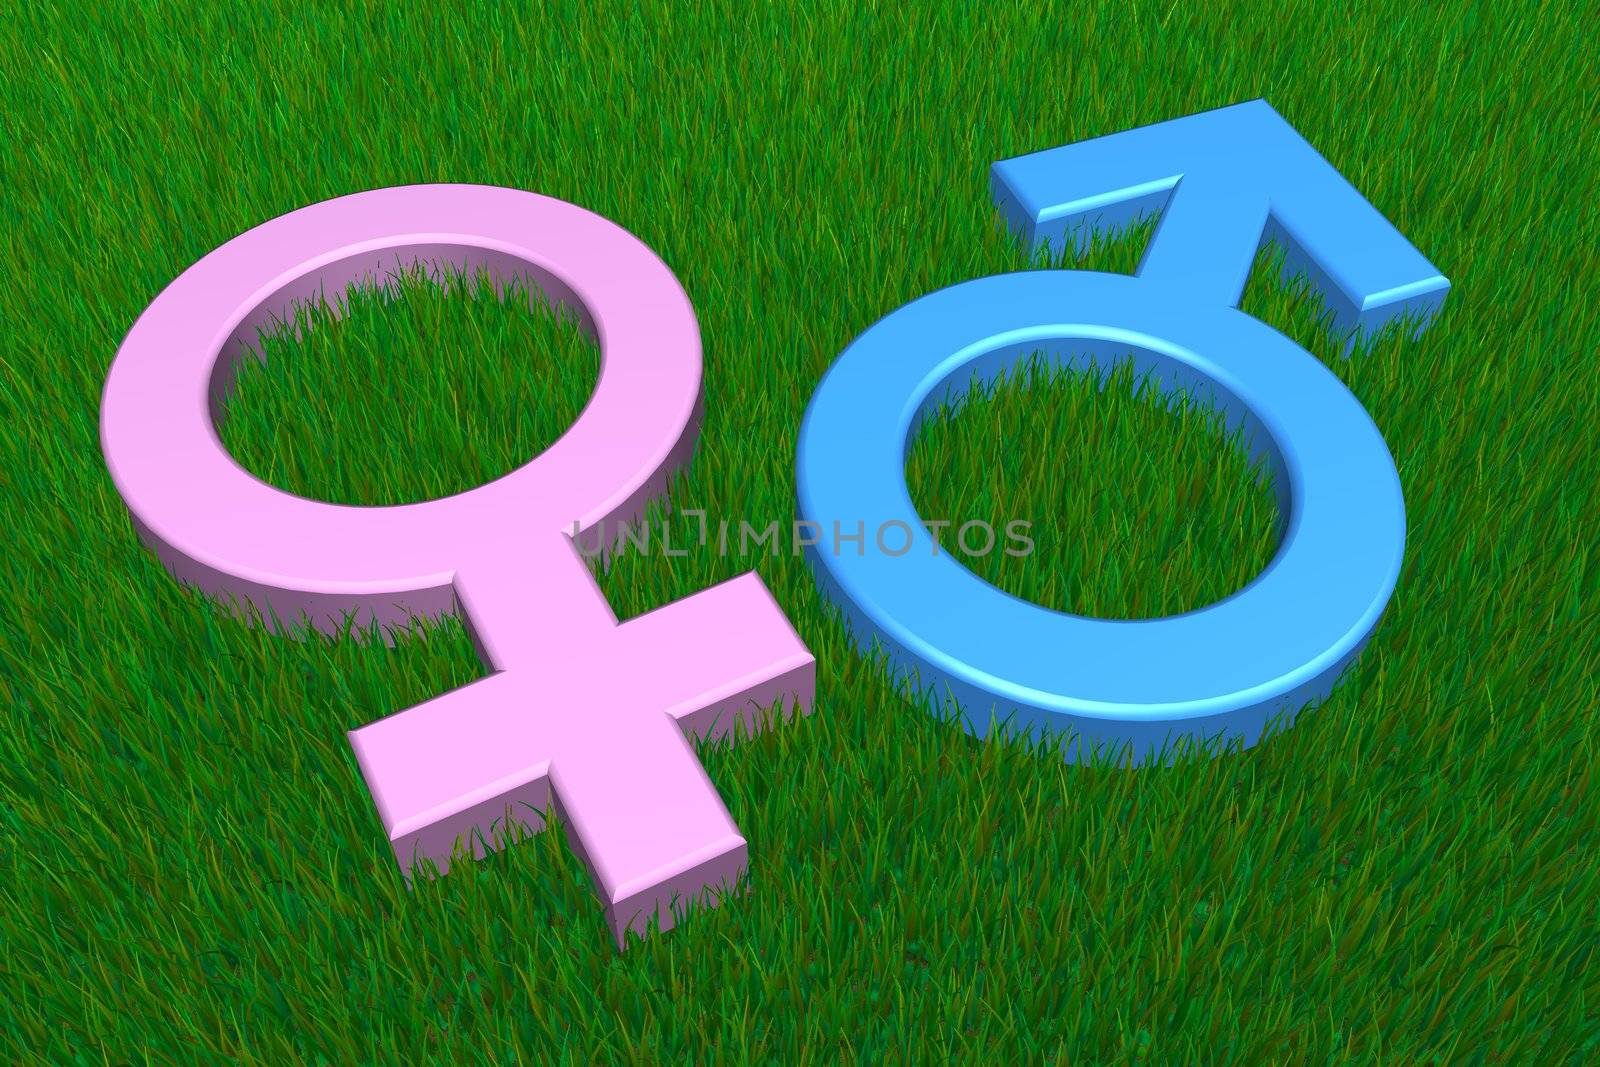 Blue Male/Pink Female Symbols on Grass by PixBox